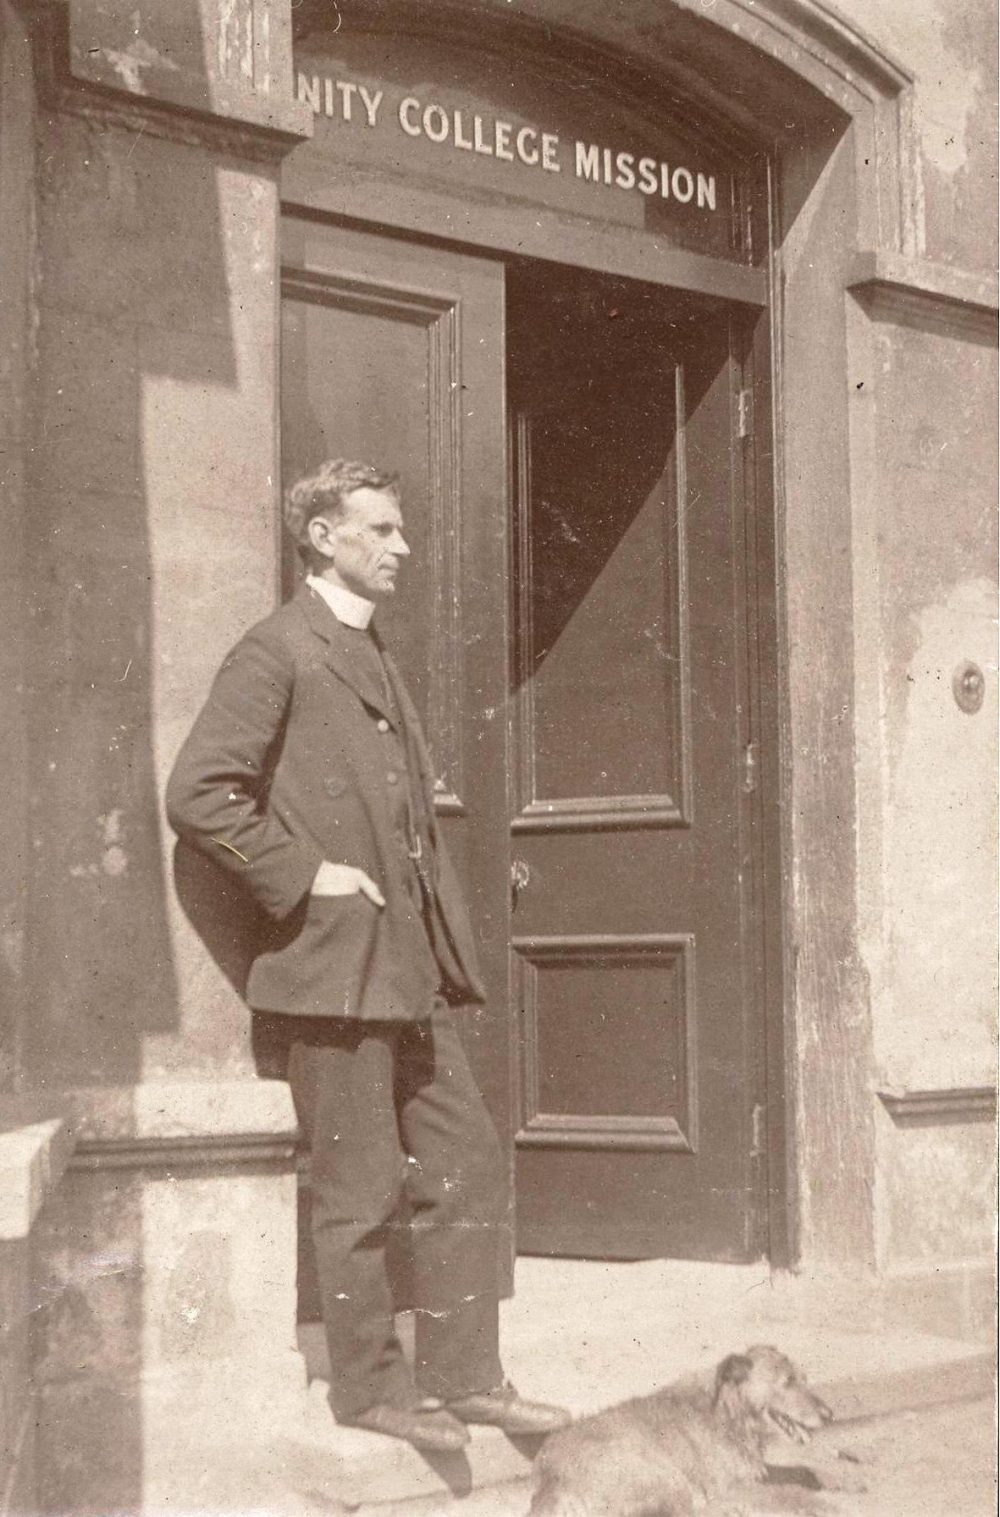 Revd Arthur Barton (1881-1962) Head of Mission 1912-14 at the door of the Trinity College Mission Belfast, RCB Library MS 295